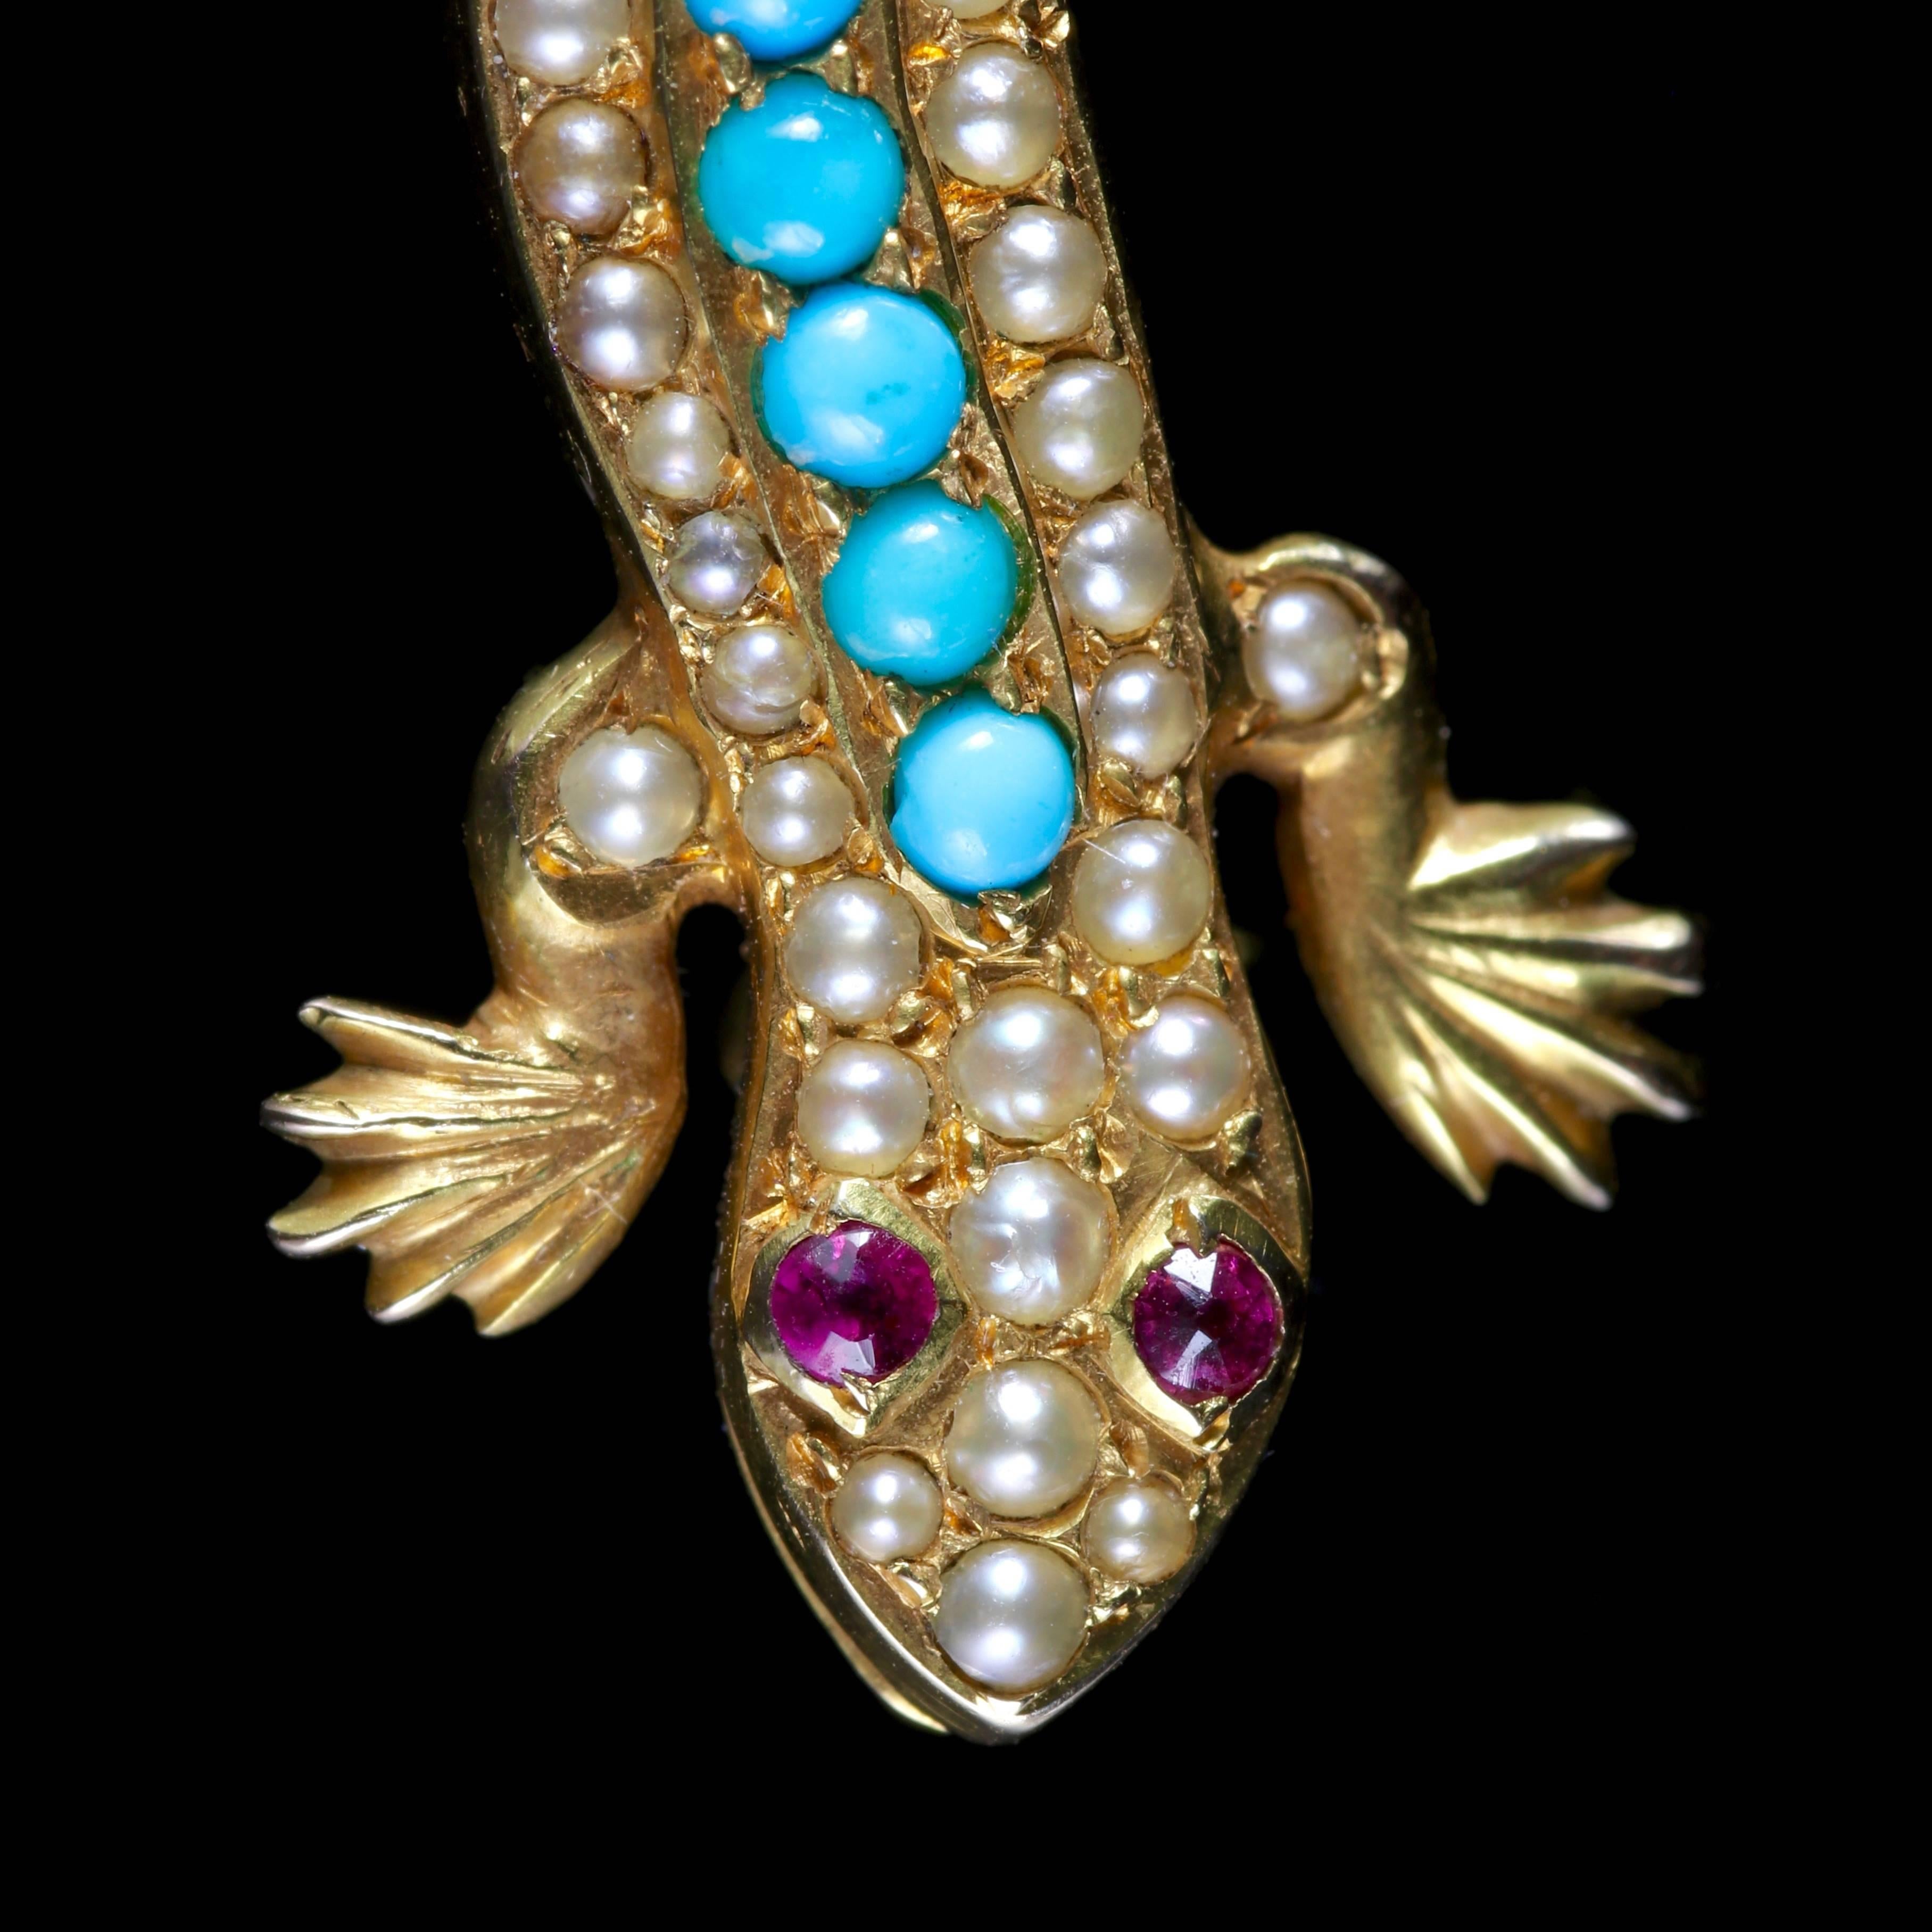 To read more please click continue reading below-

This fabulous 15ct Yellow Gold lizard brooch is genuine Victorian, Circa 1900. 

Victorian jewellery mirrored Queen Victoria’s life with the Romantic period producing decorative animal, bird and